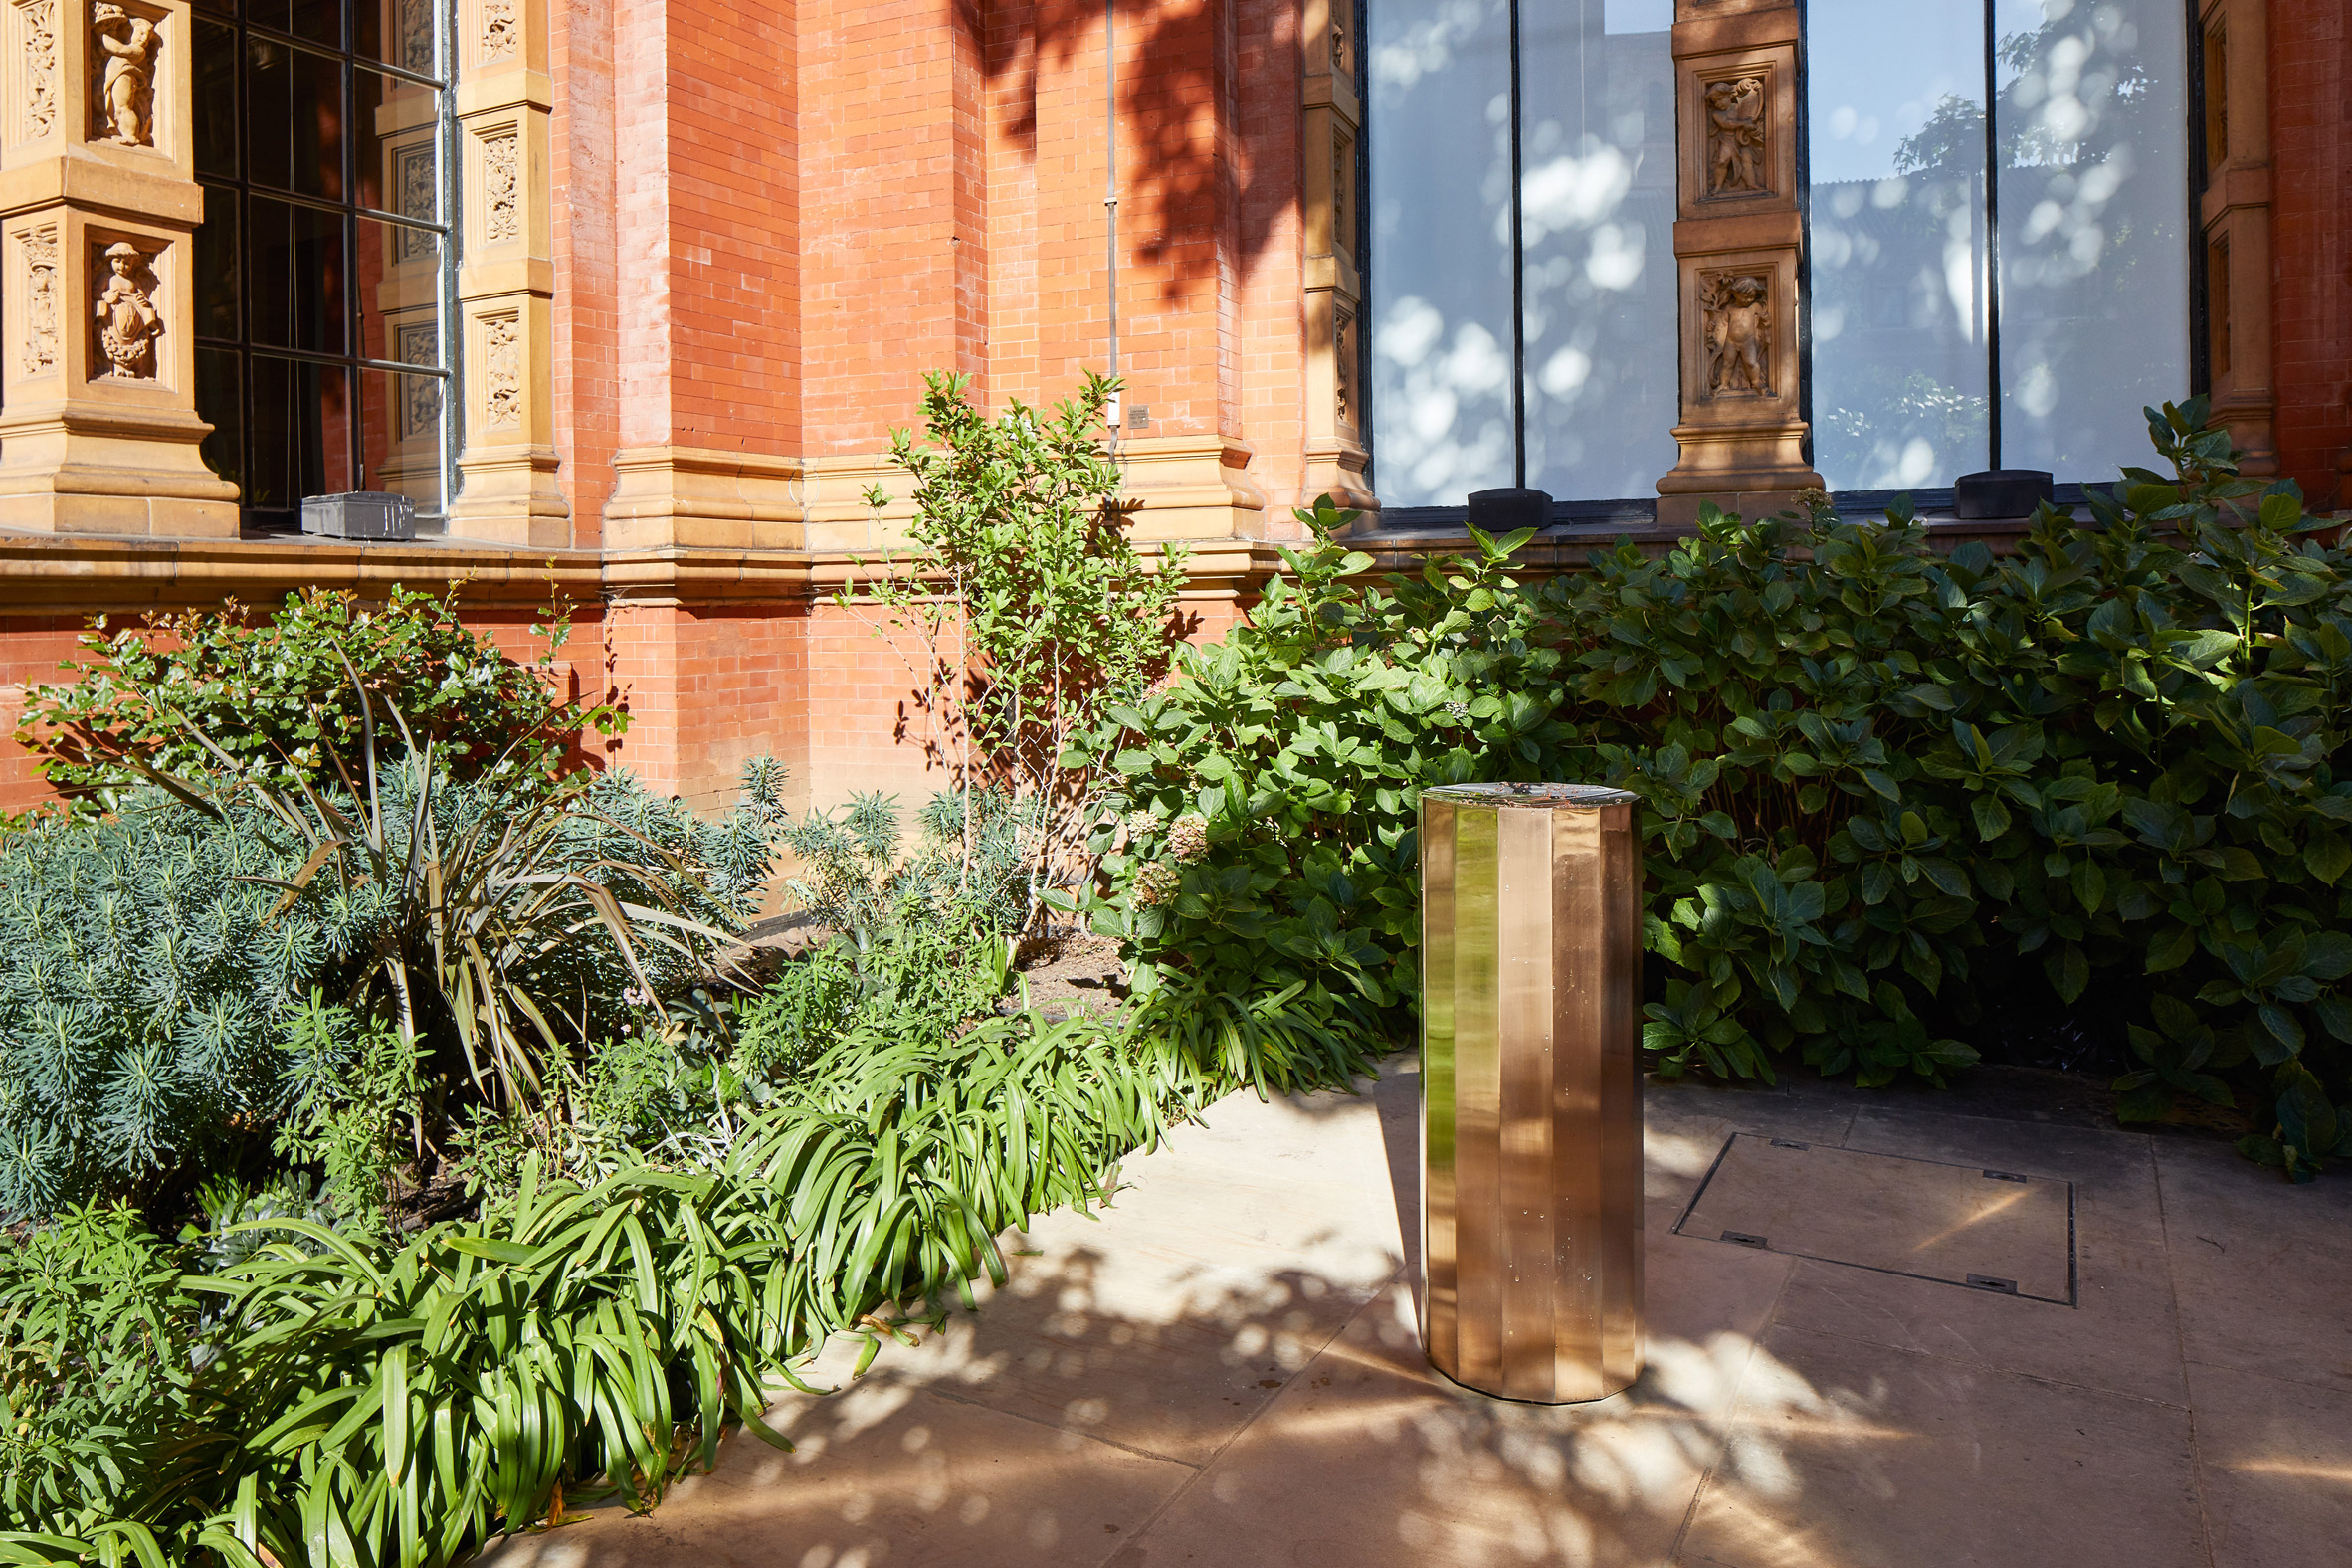 Michael Anastassiades installs bronze drinking fountain at the V&A that "lights up your whole face"